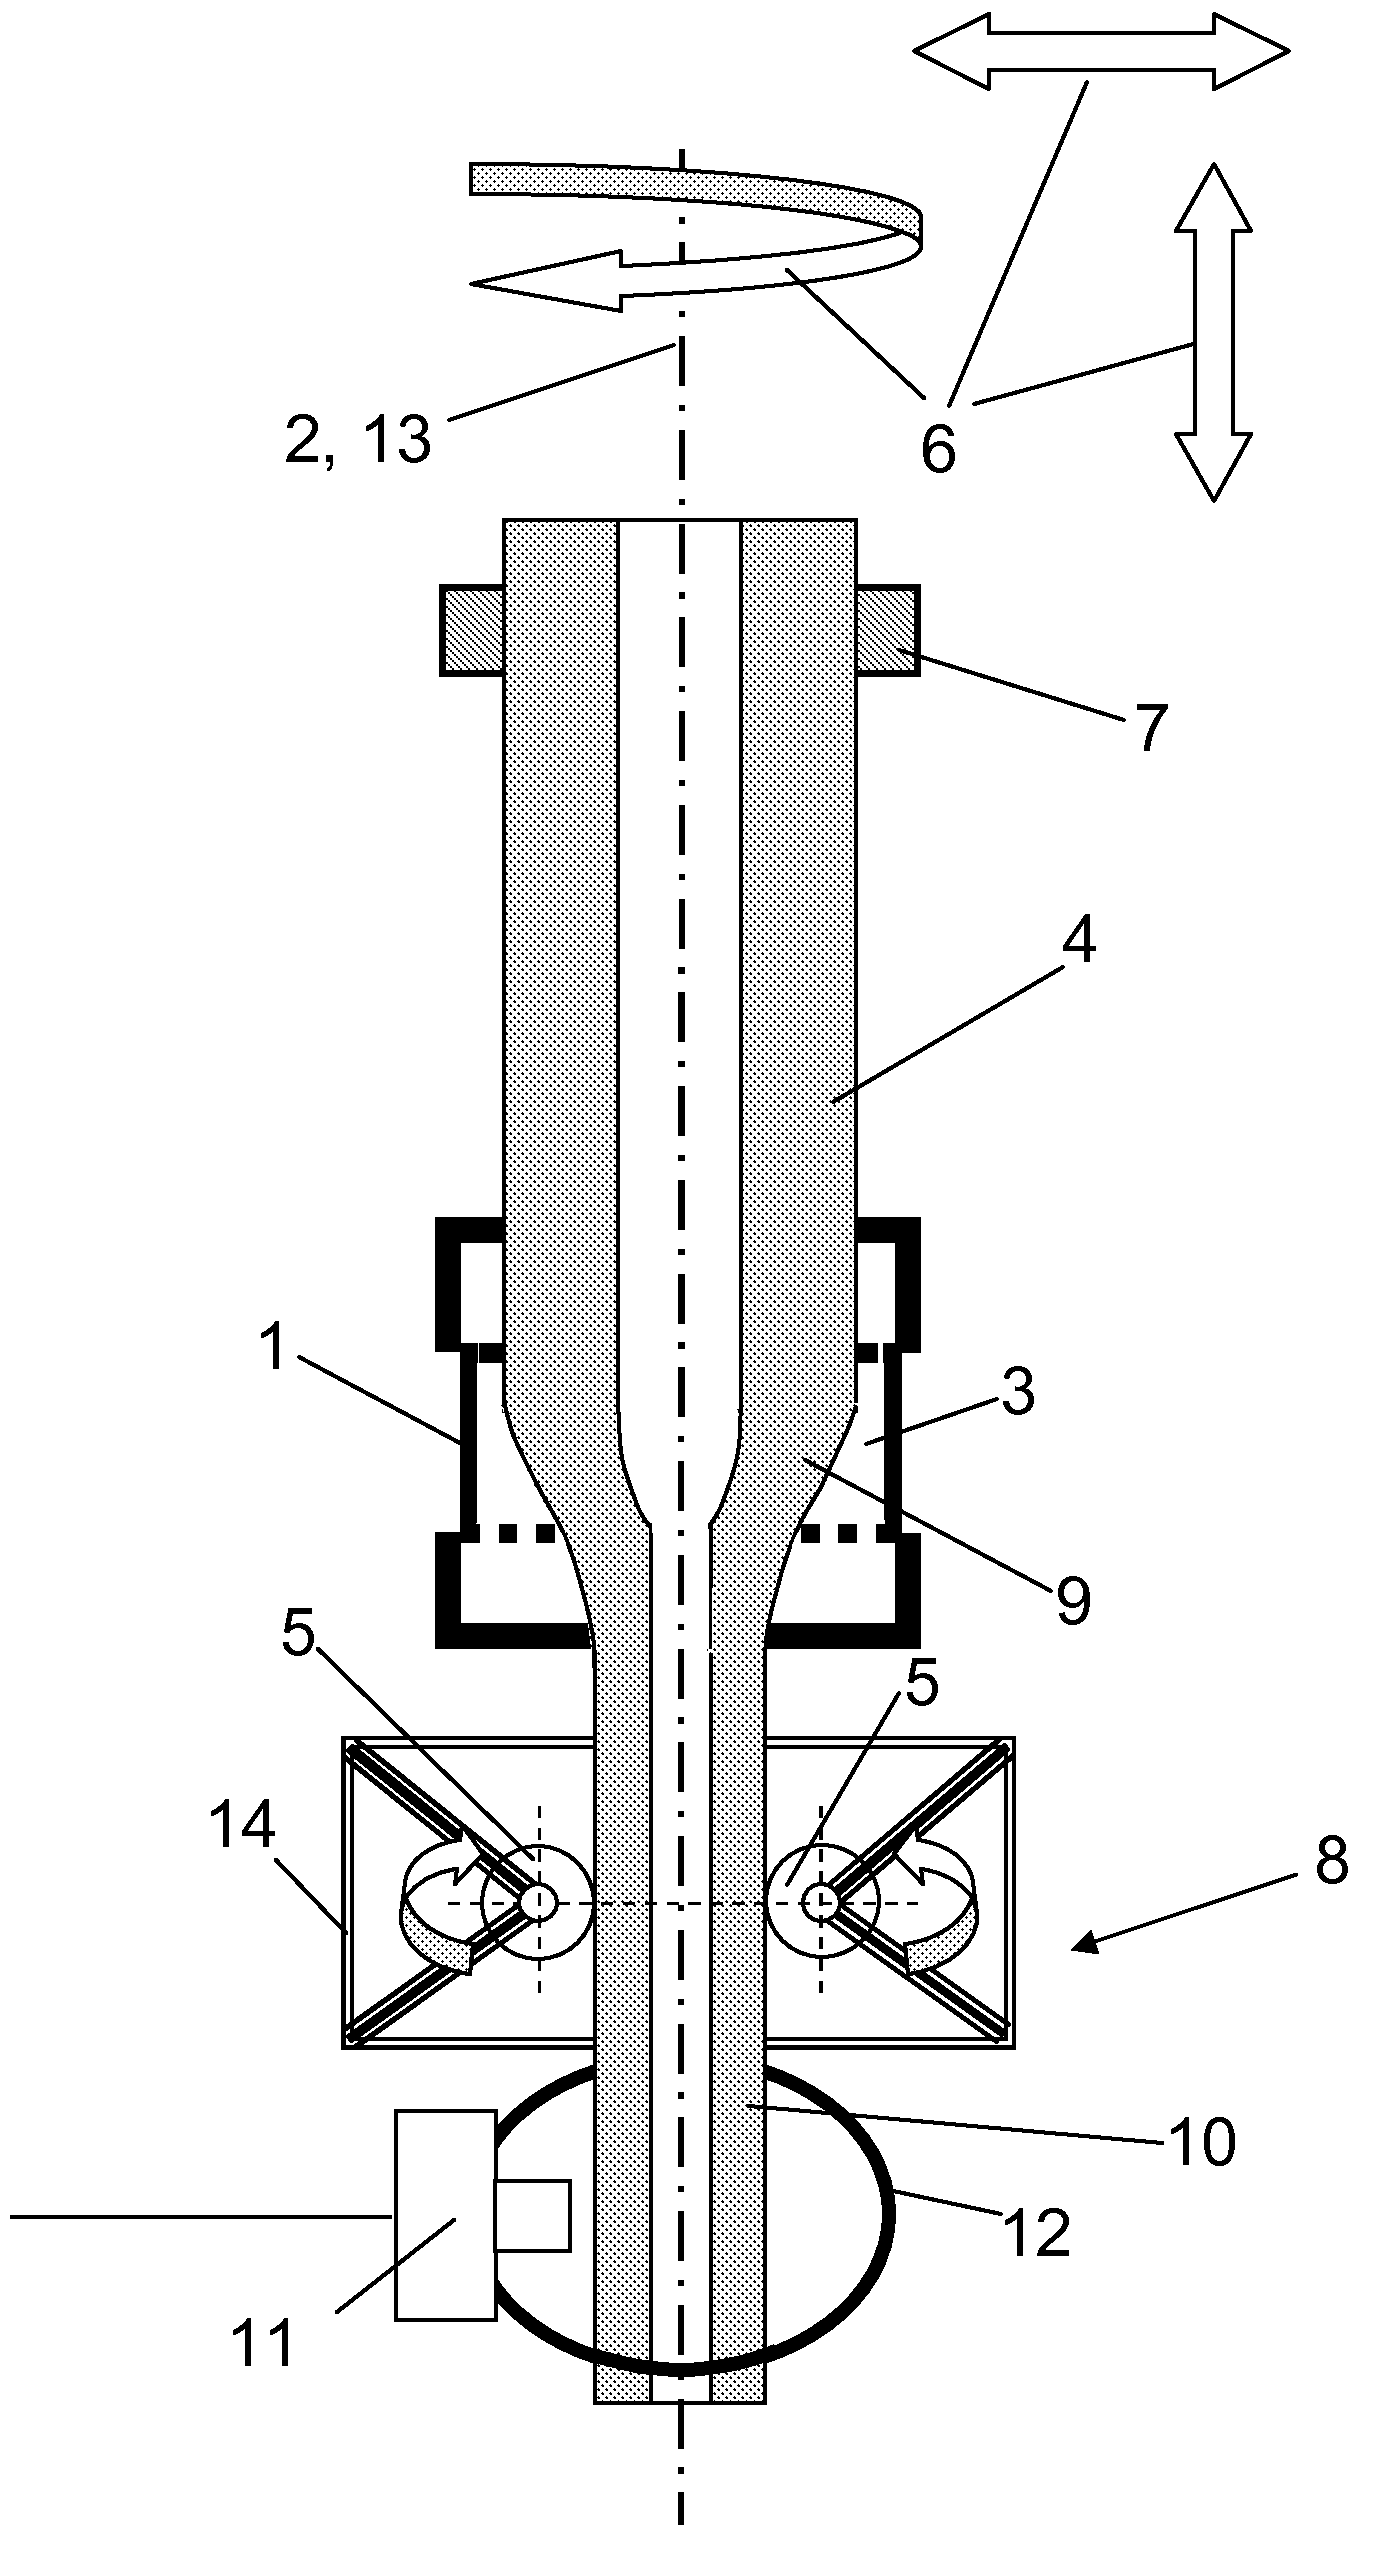 Method for producing a tube of quartz glass by elongating a hollow cylinder of quartz glass